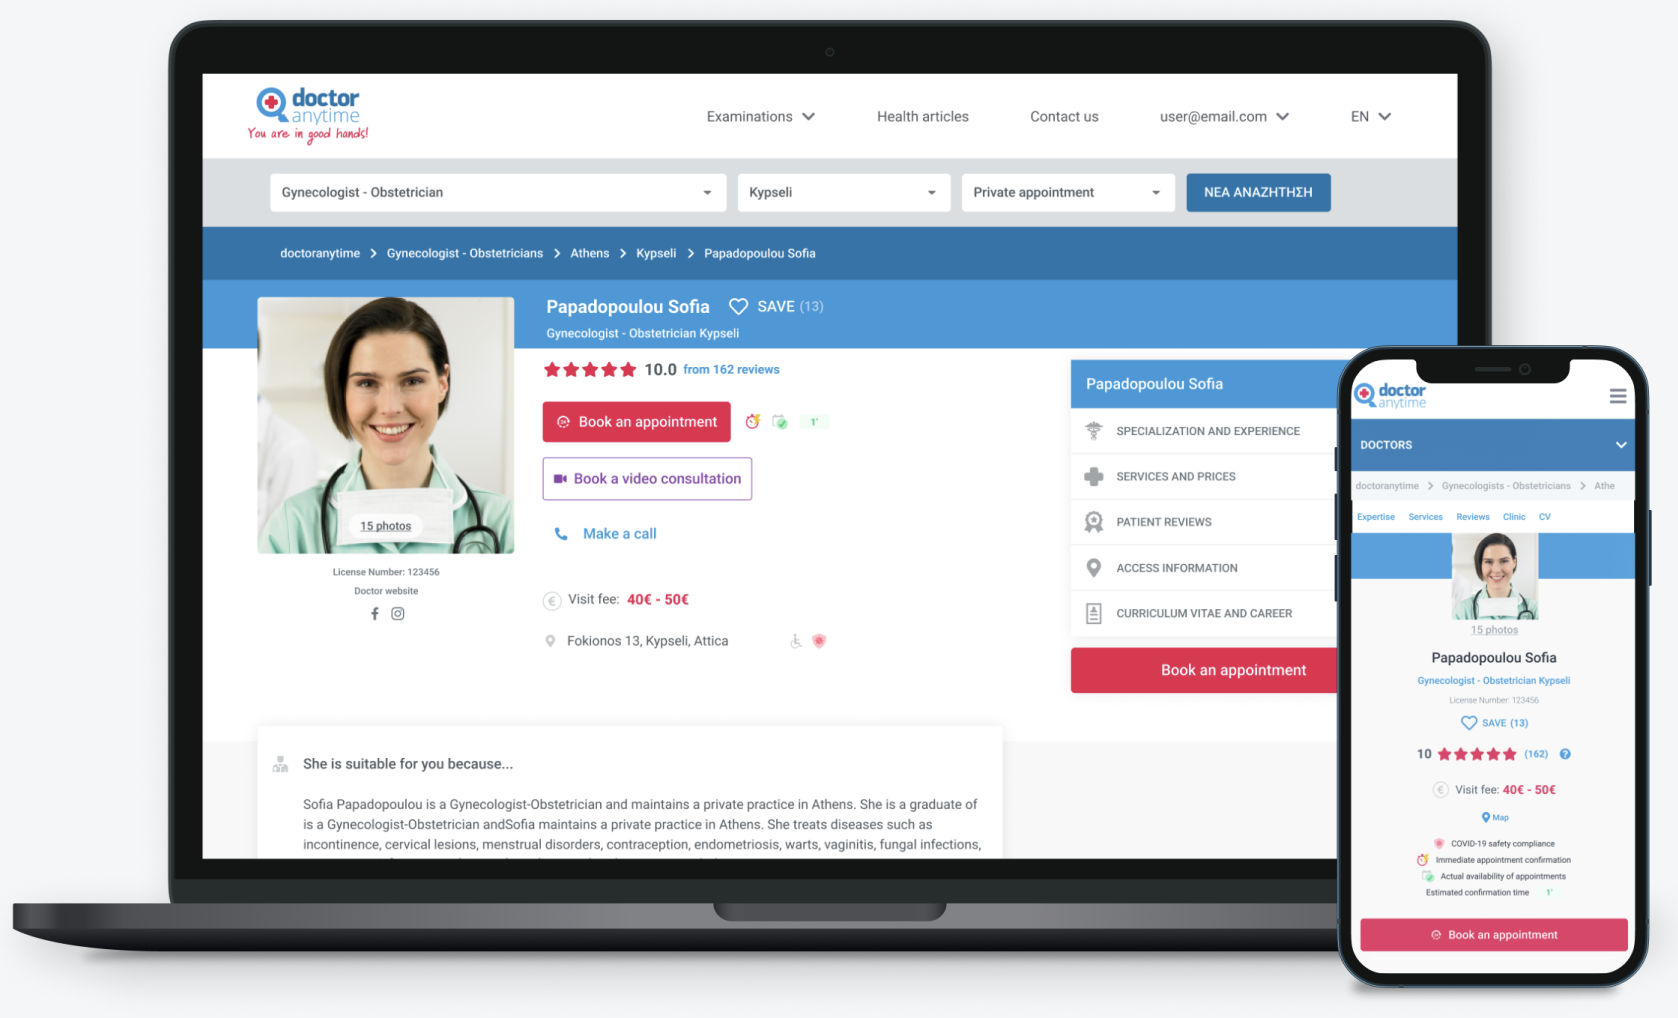 The custom medical profile helps doctors build their professional reputation online and increase their visibility.